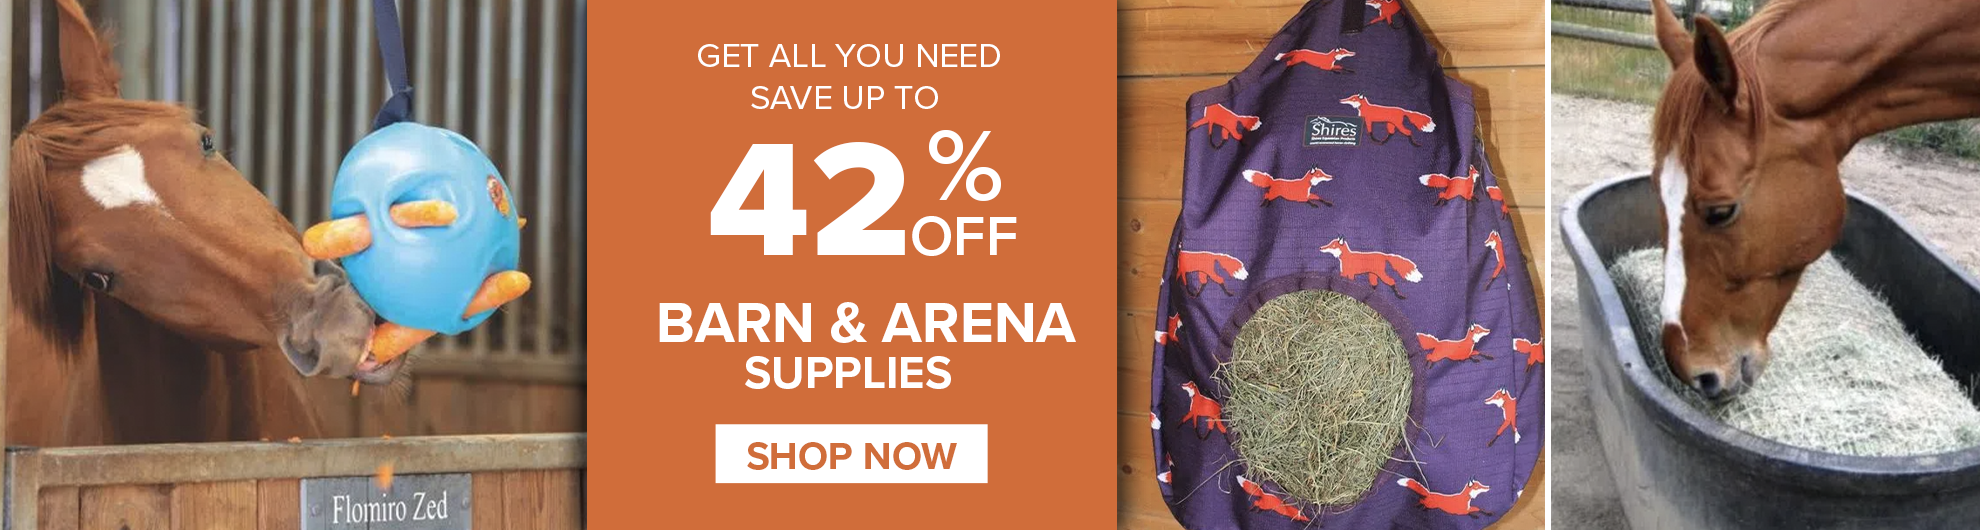 Get Discounted Barn & Arena Supplies